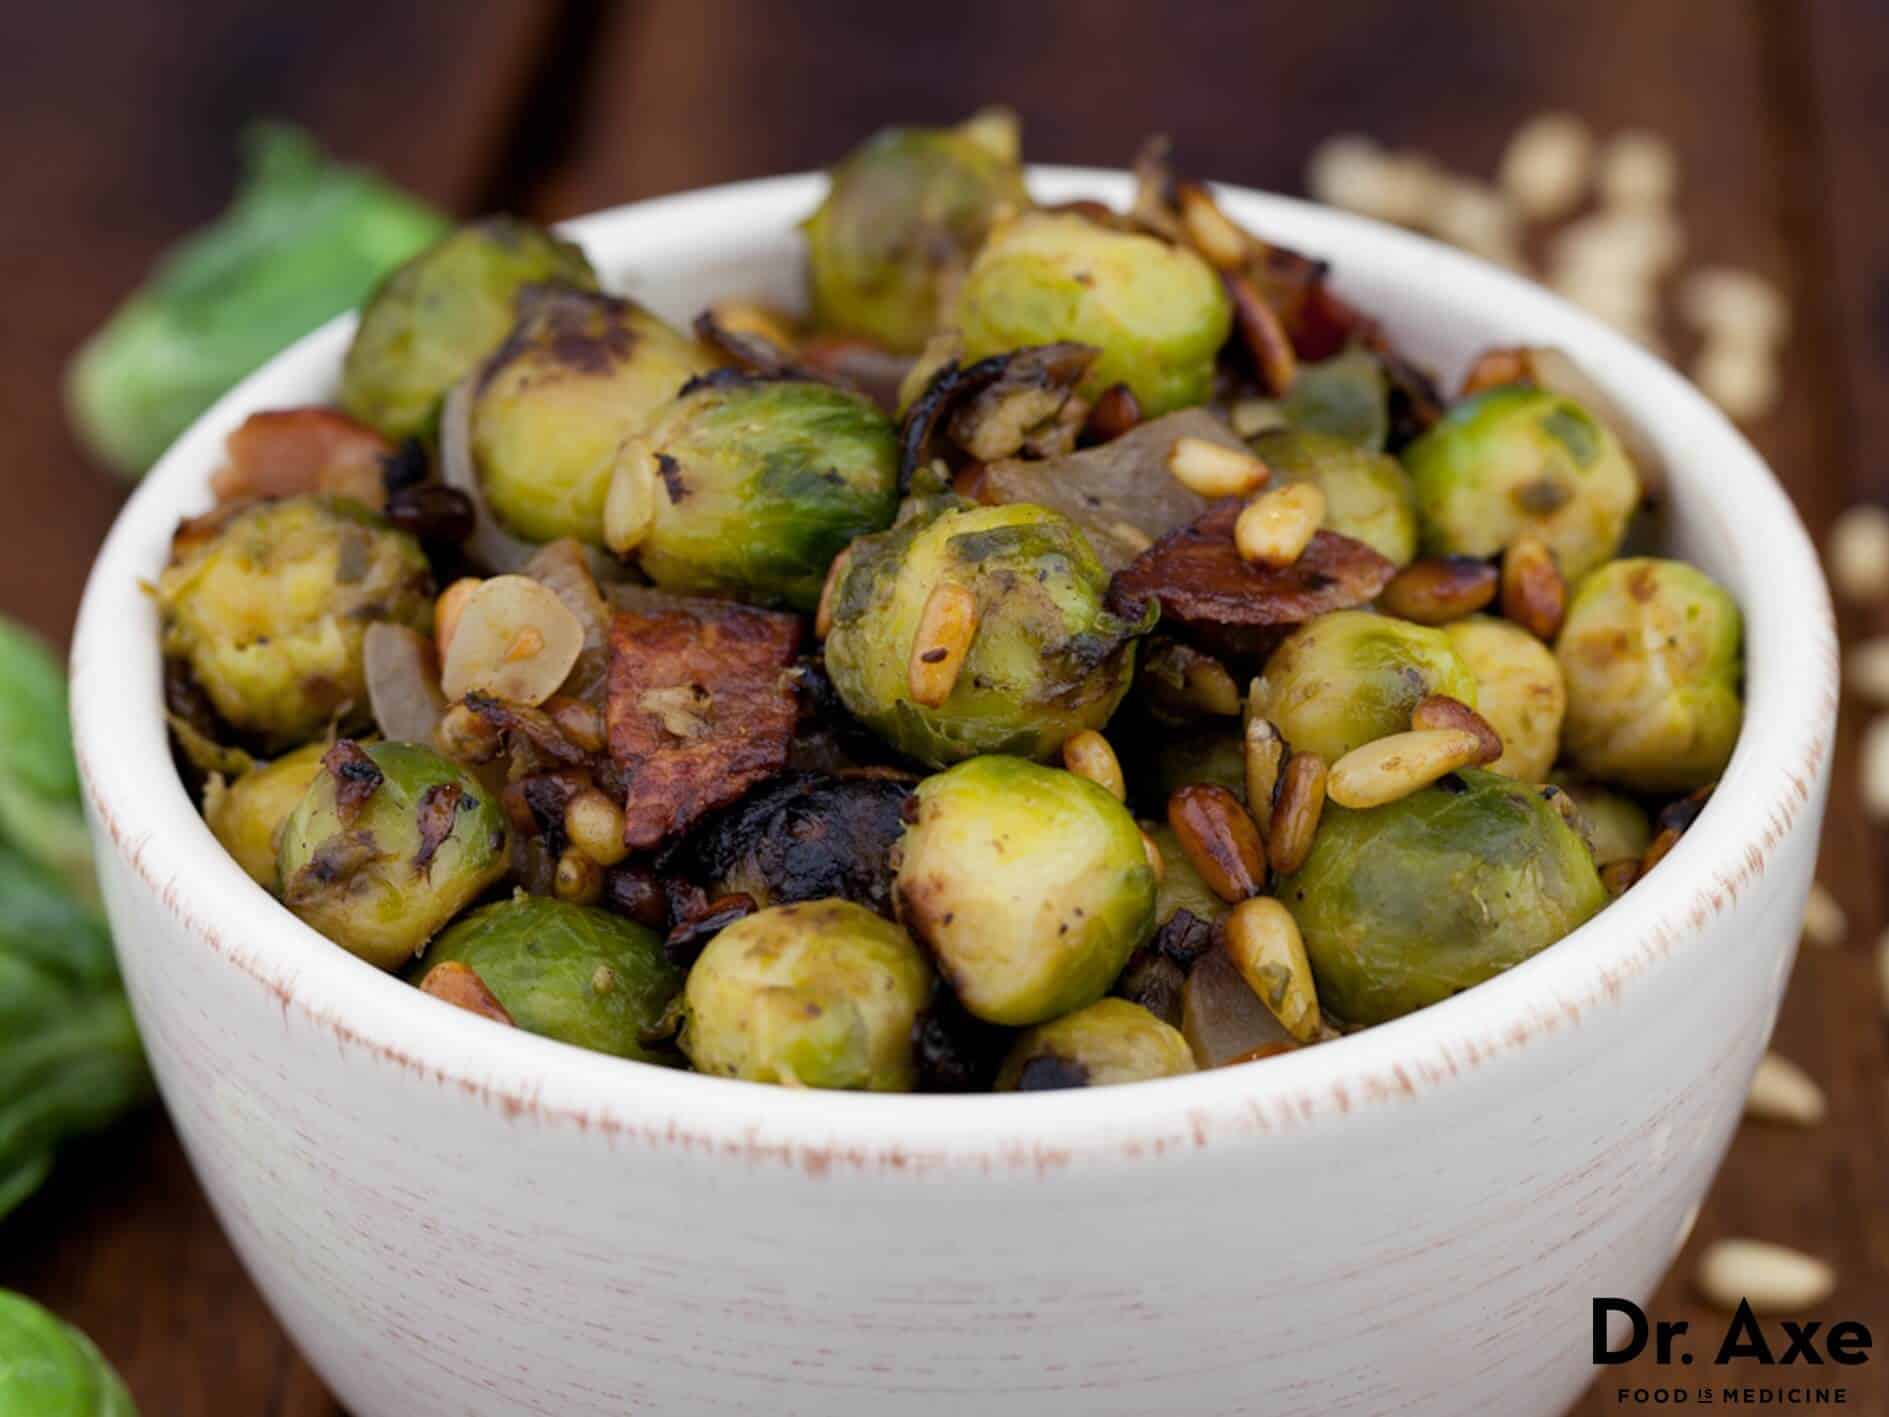 Bacon brussel sprouts recipe - Dr. Axe